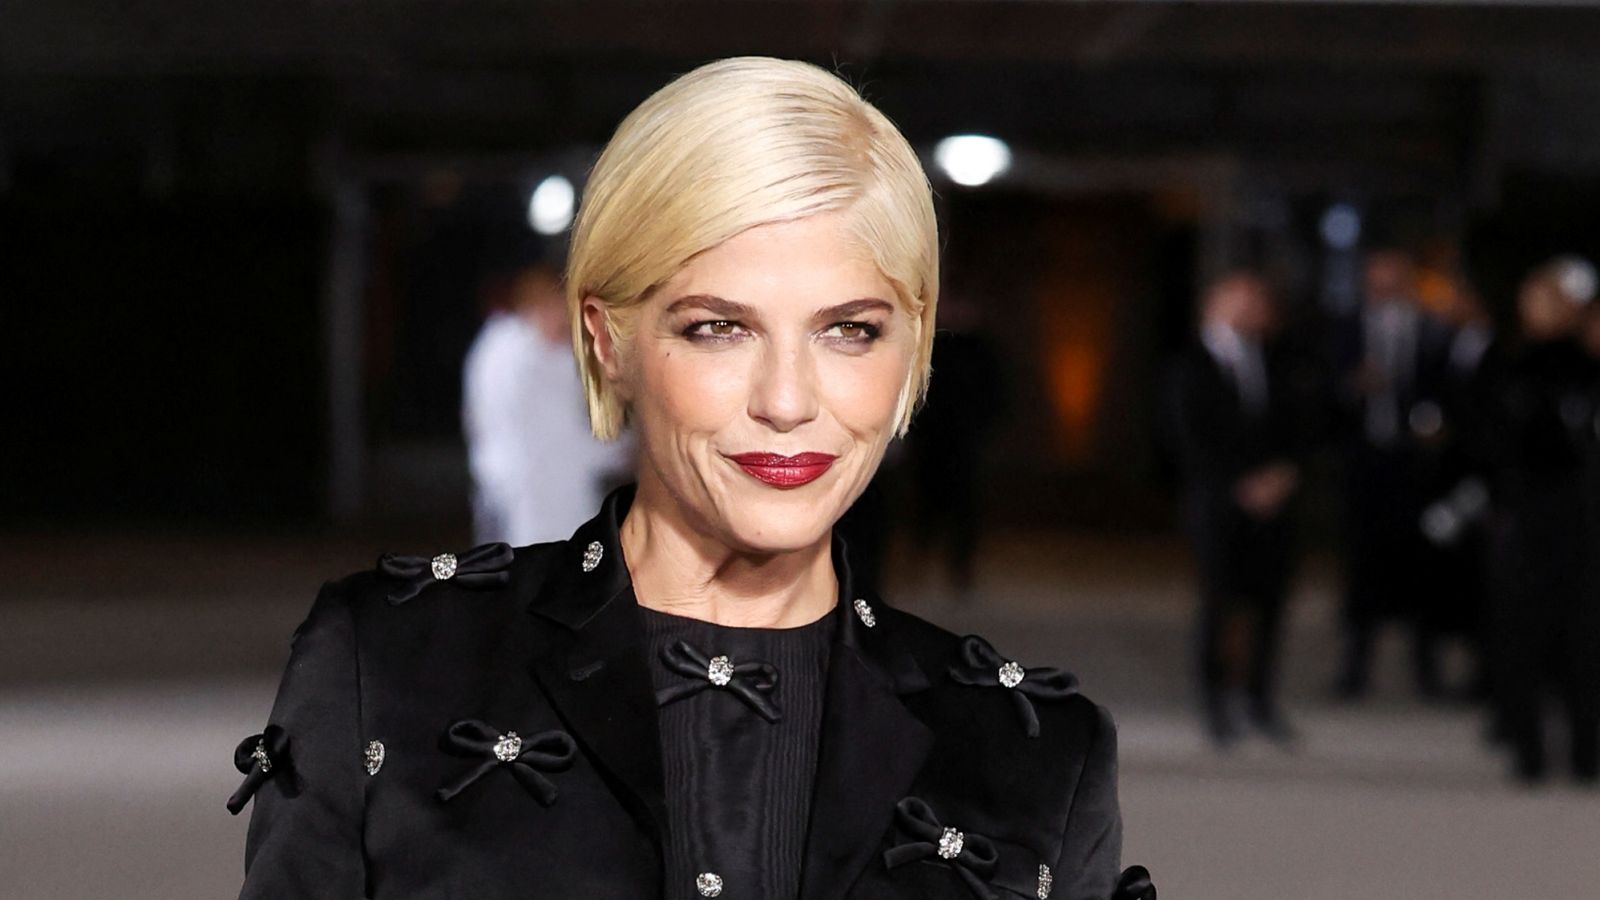 Legally Blonde actress Selma Blair apologises for Islamophobic comment